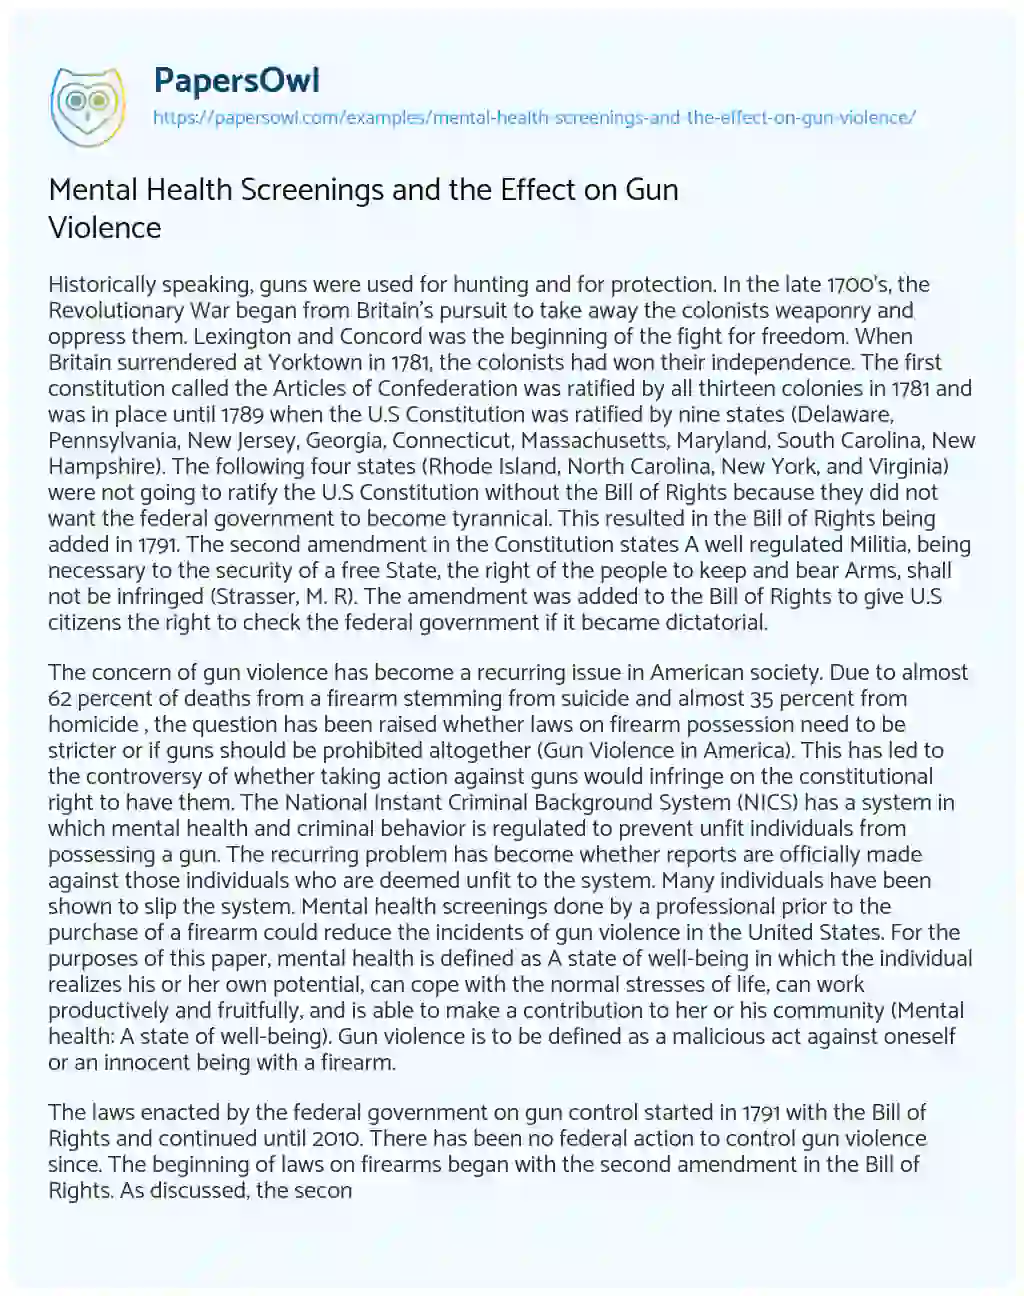 Essay on Mental Health Screenings and the Effect on Gun Violence